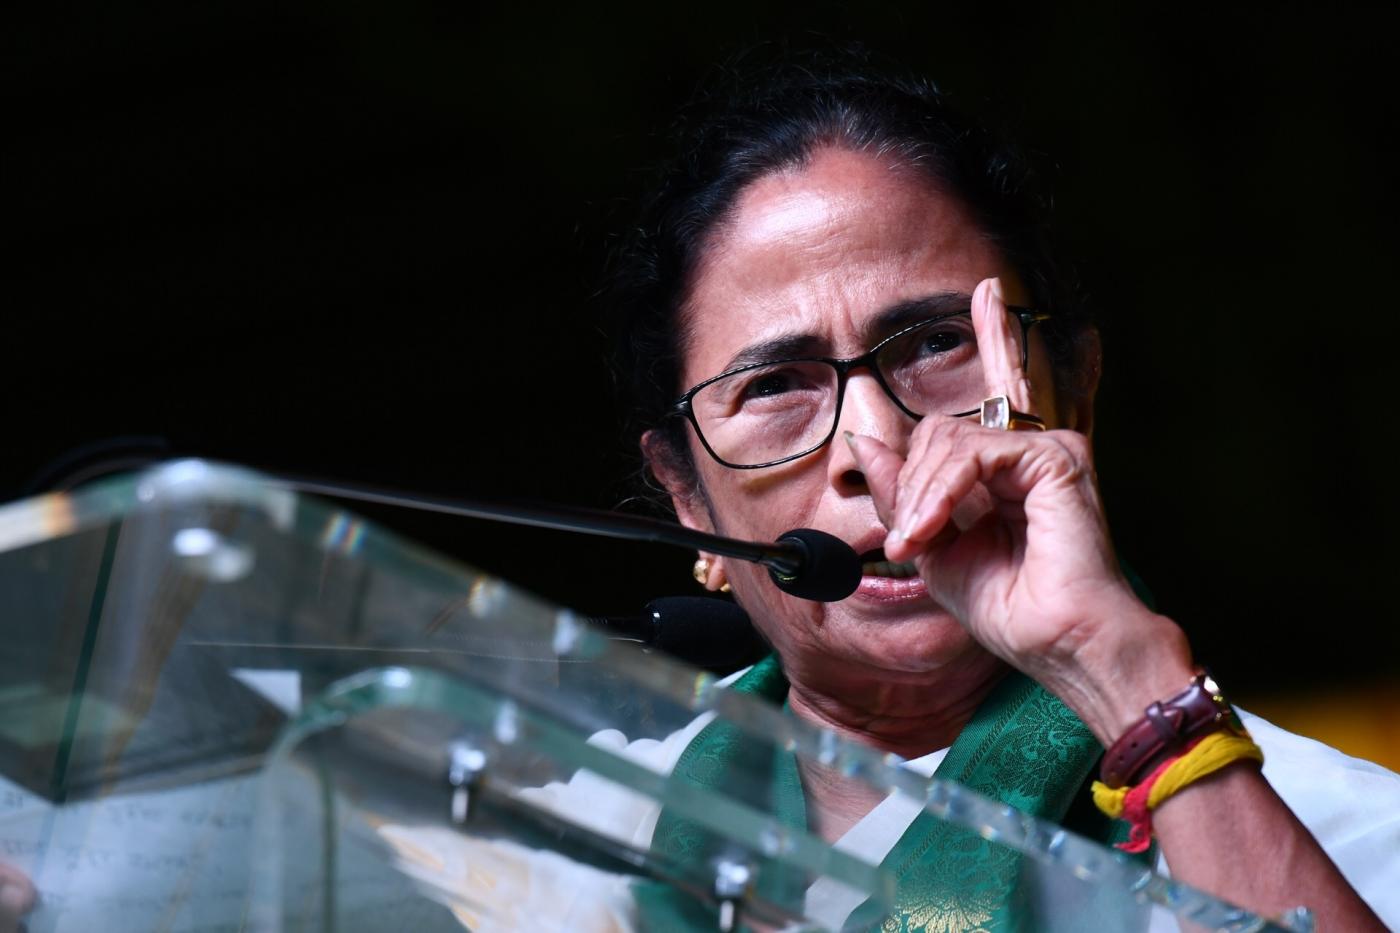 Visakhapatnam: West Bengal Chief Minister and Trinamool Congress supremo Mamata Banerjee addresses during a Telugu Desam Party's rally in Visakhapatnam on March 31, 2019. (Photo: IANS) by .